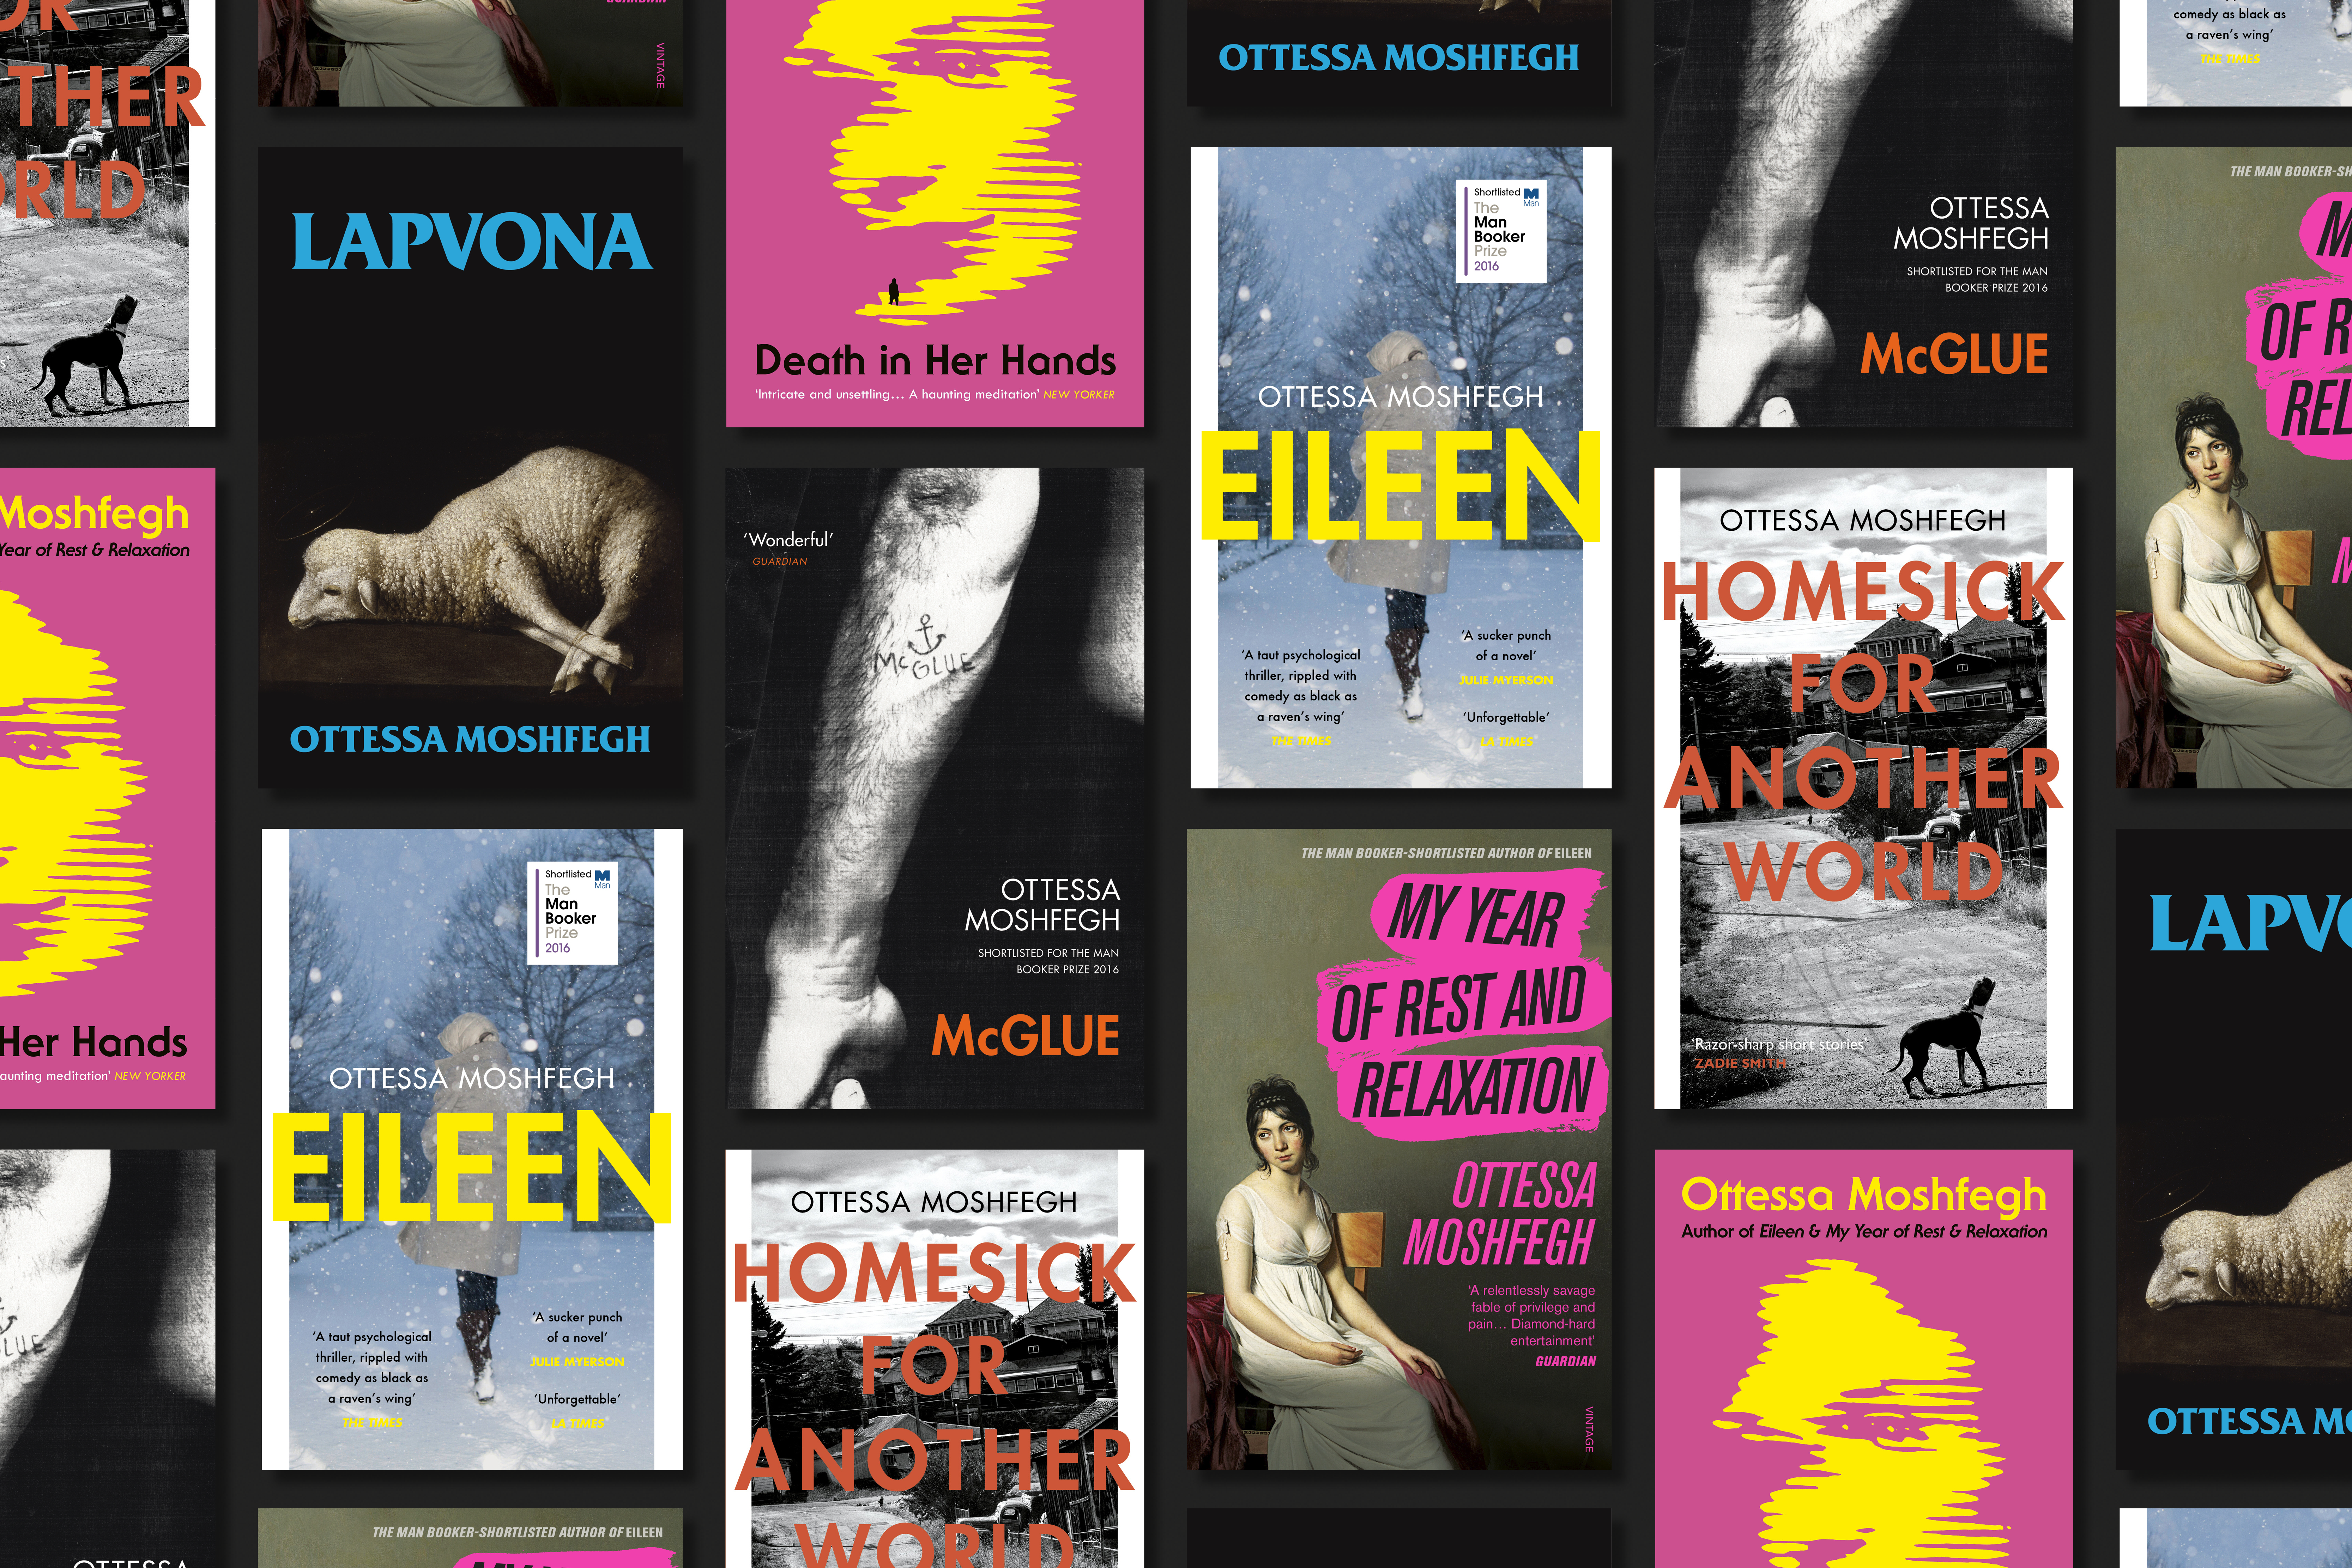 Image featuring all of Ottessa Moshfegh's book covers on a black background.